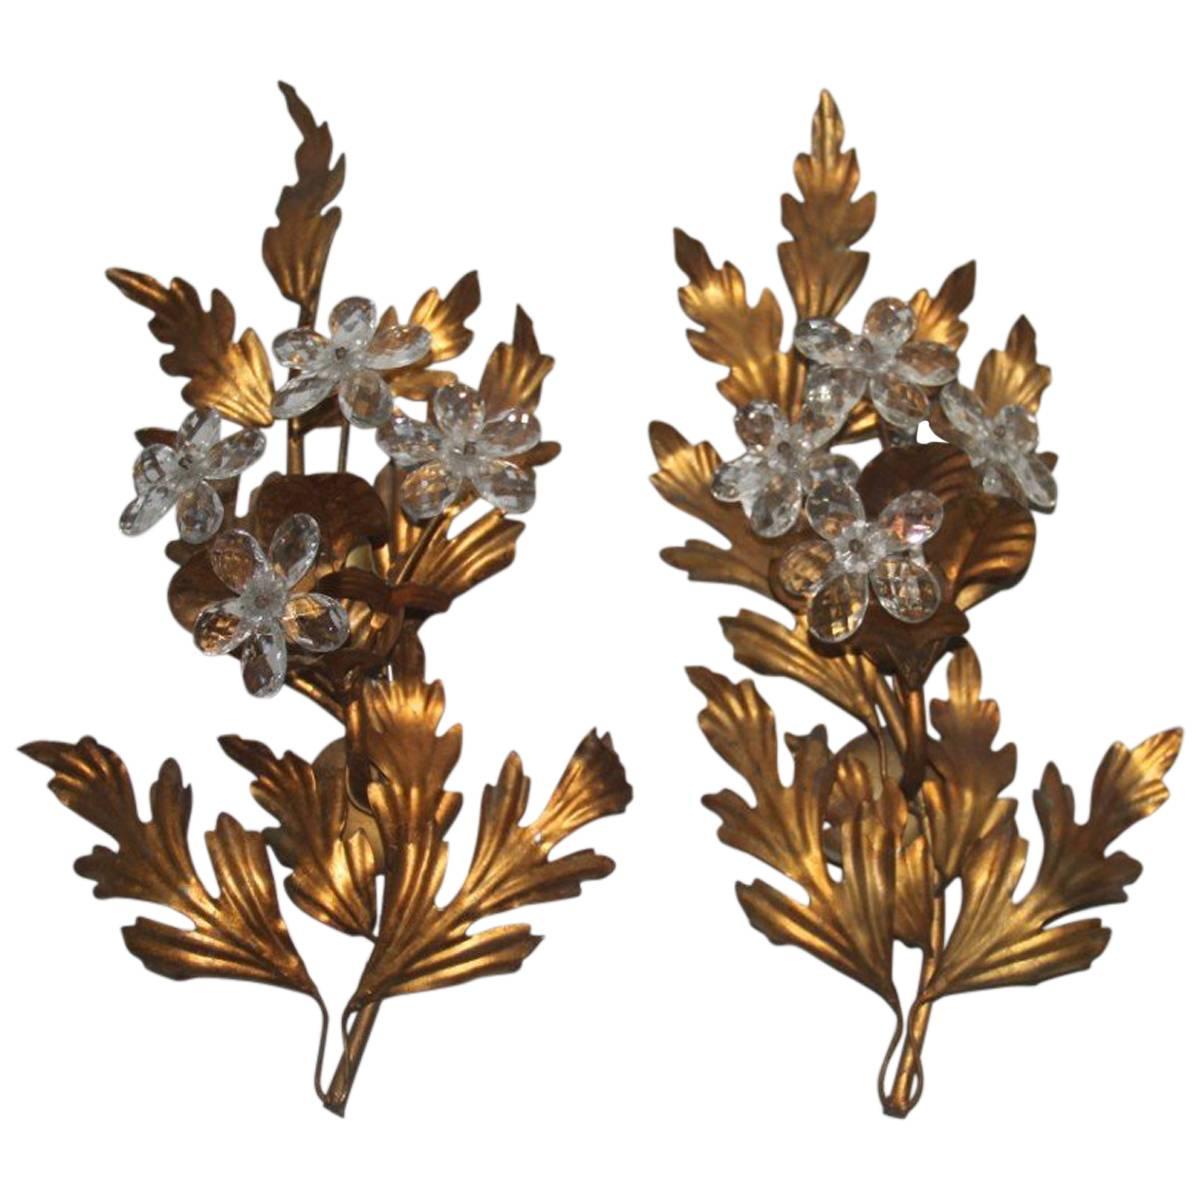 Pair of Sculpture Metal Sconces Crystal Design, 1950s, French